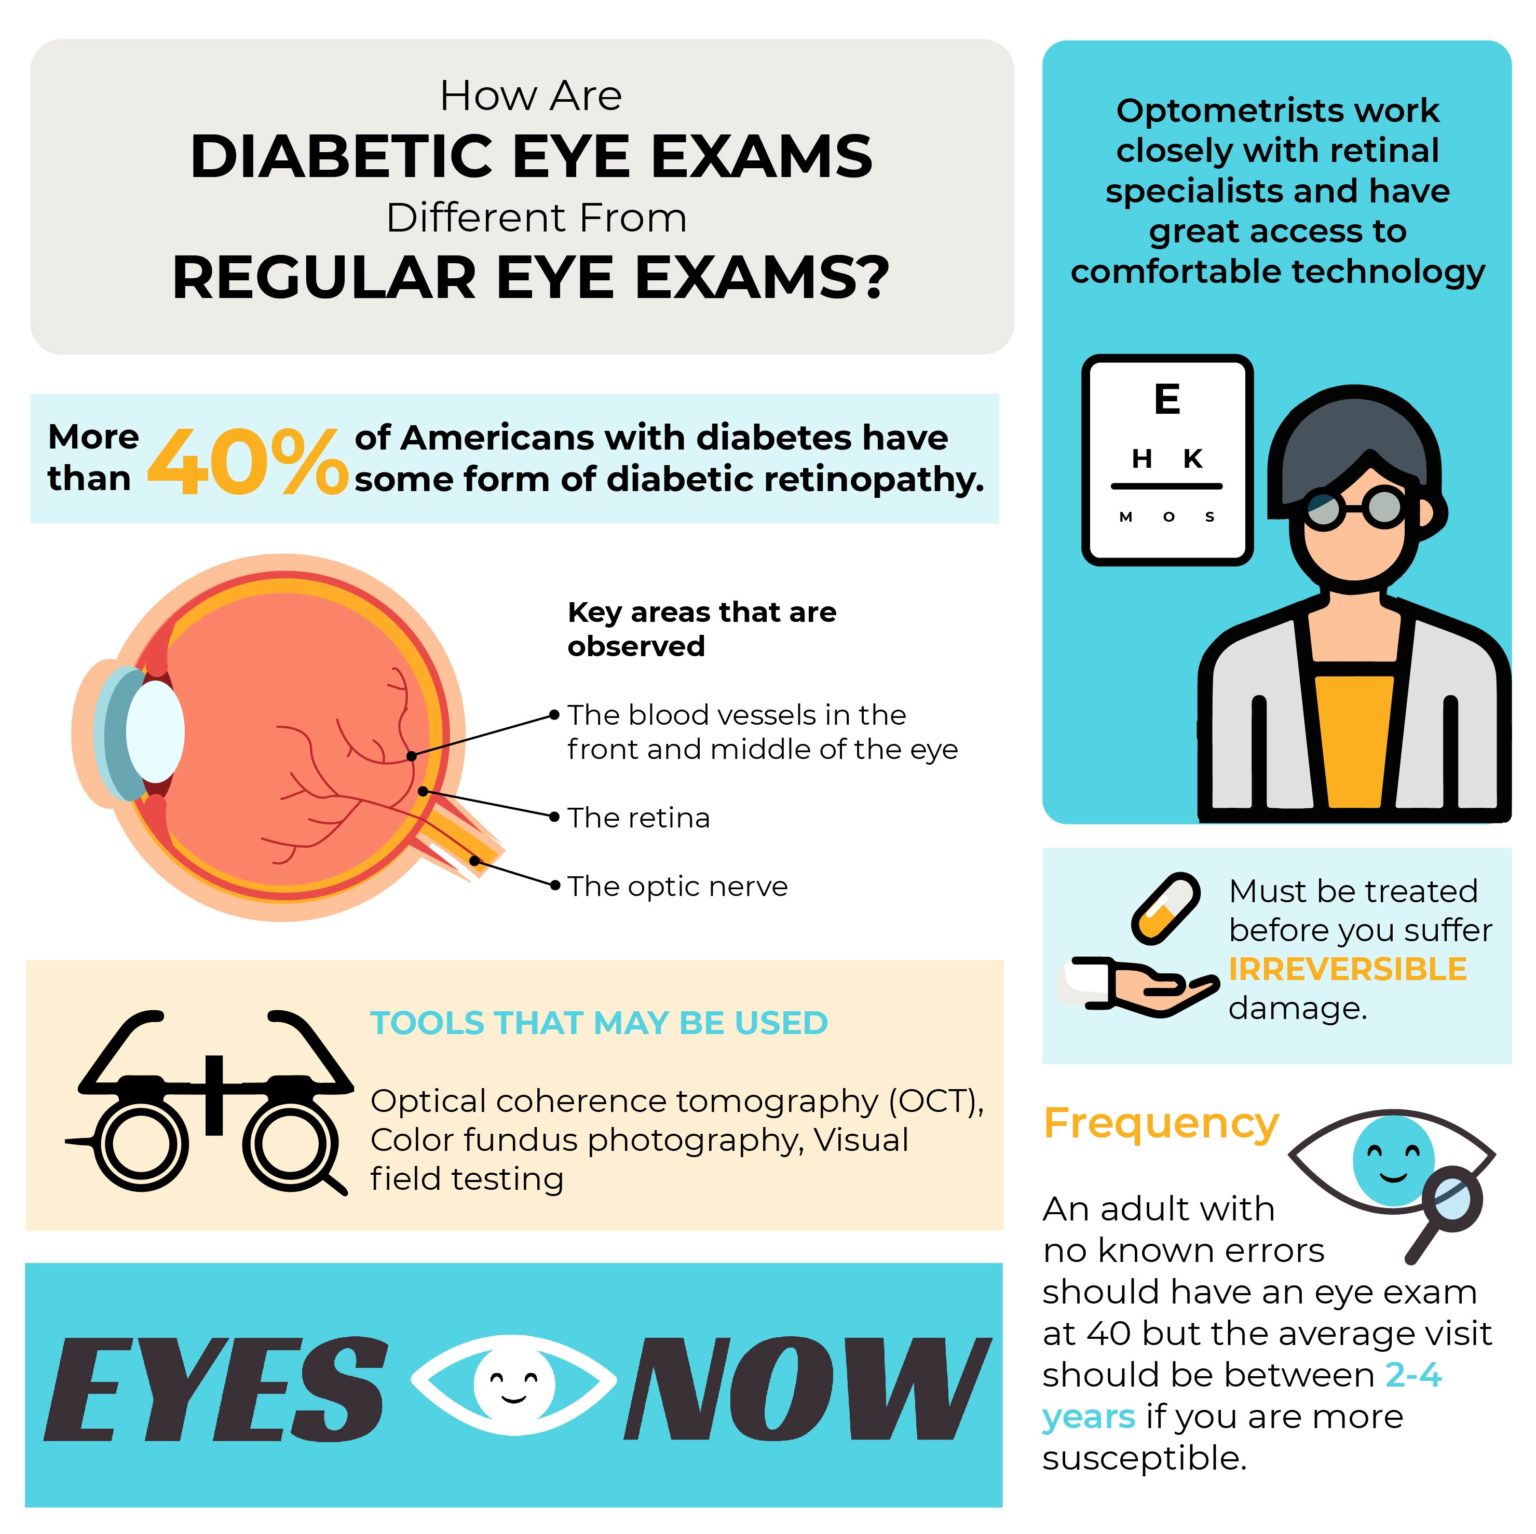 How Are Diabetic Eye Exams Different from Regular Eye Exams?